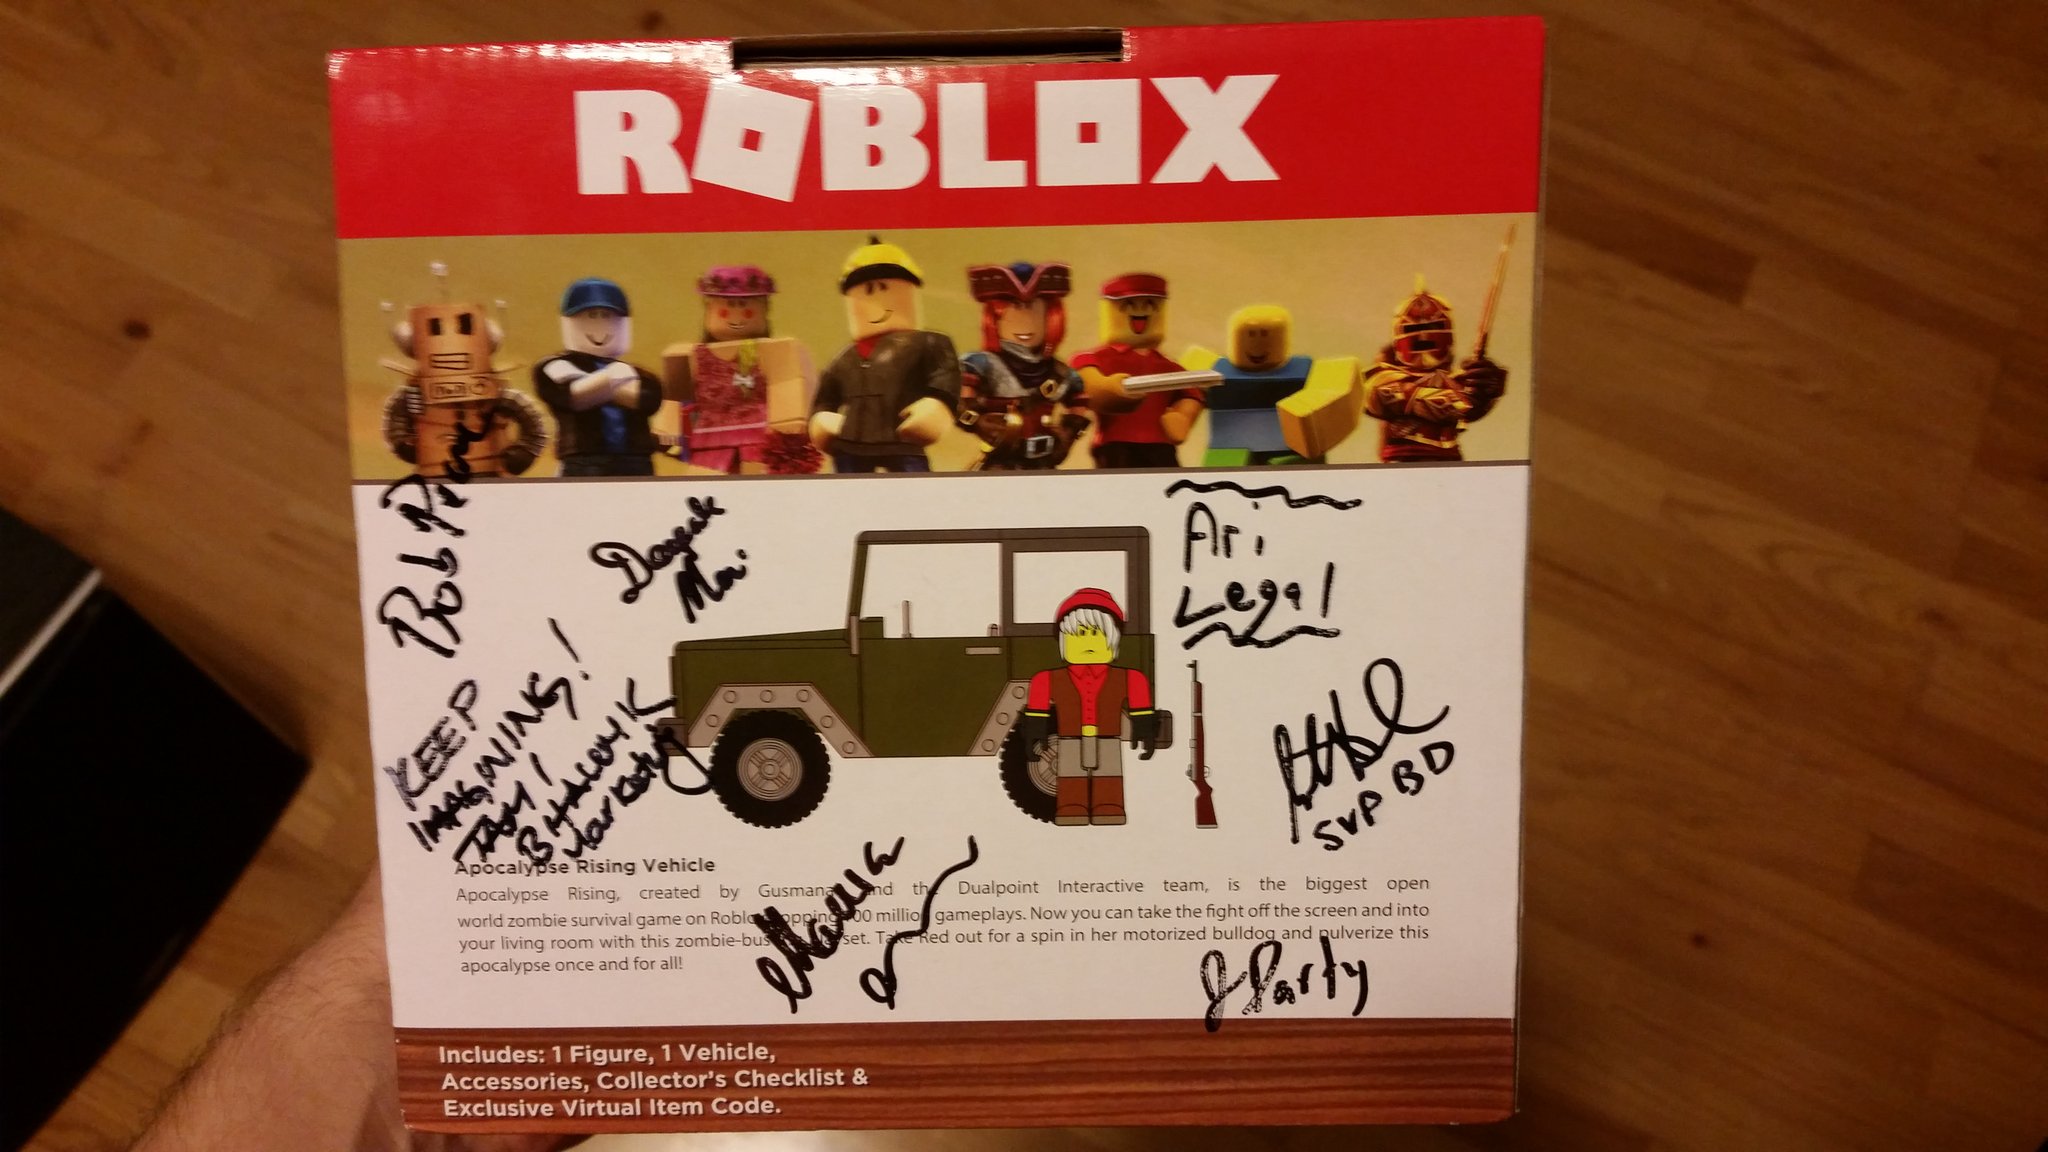 Gus Dubetz On Twitter When I Was At Rdc I Picked Up The Apocalypse Rising 4x4 And Got It Signed By All The Roblox Staff Who Made It A Reality Https T Co Lgvy3hgstr - roblox zombie apocalypse cars